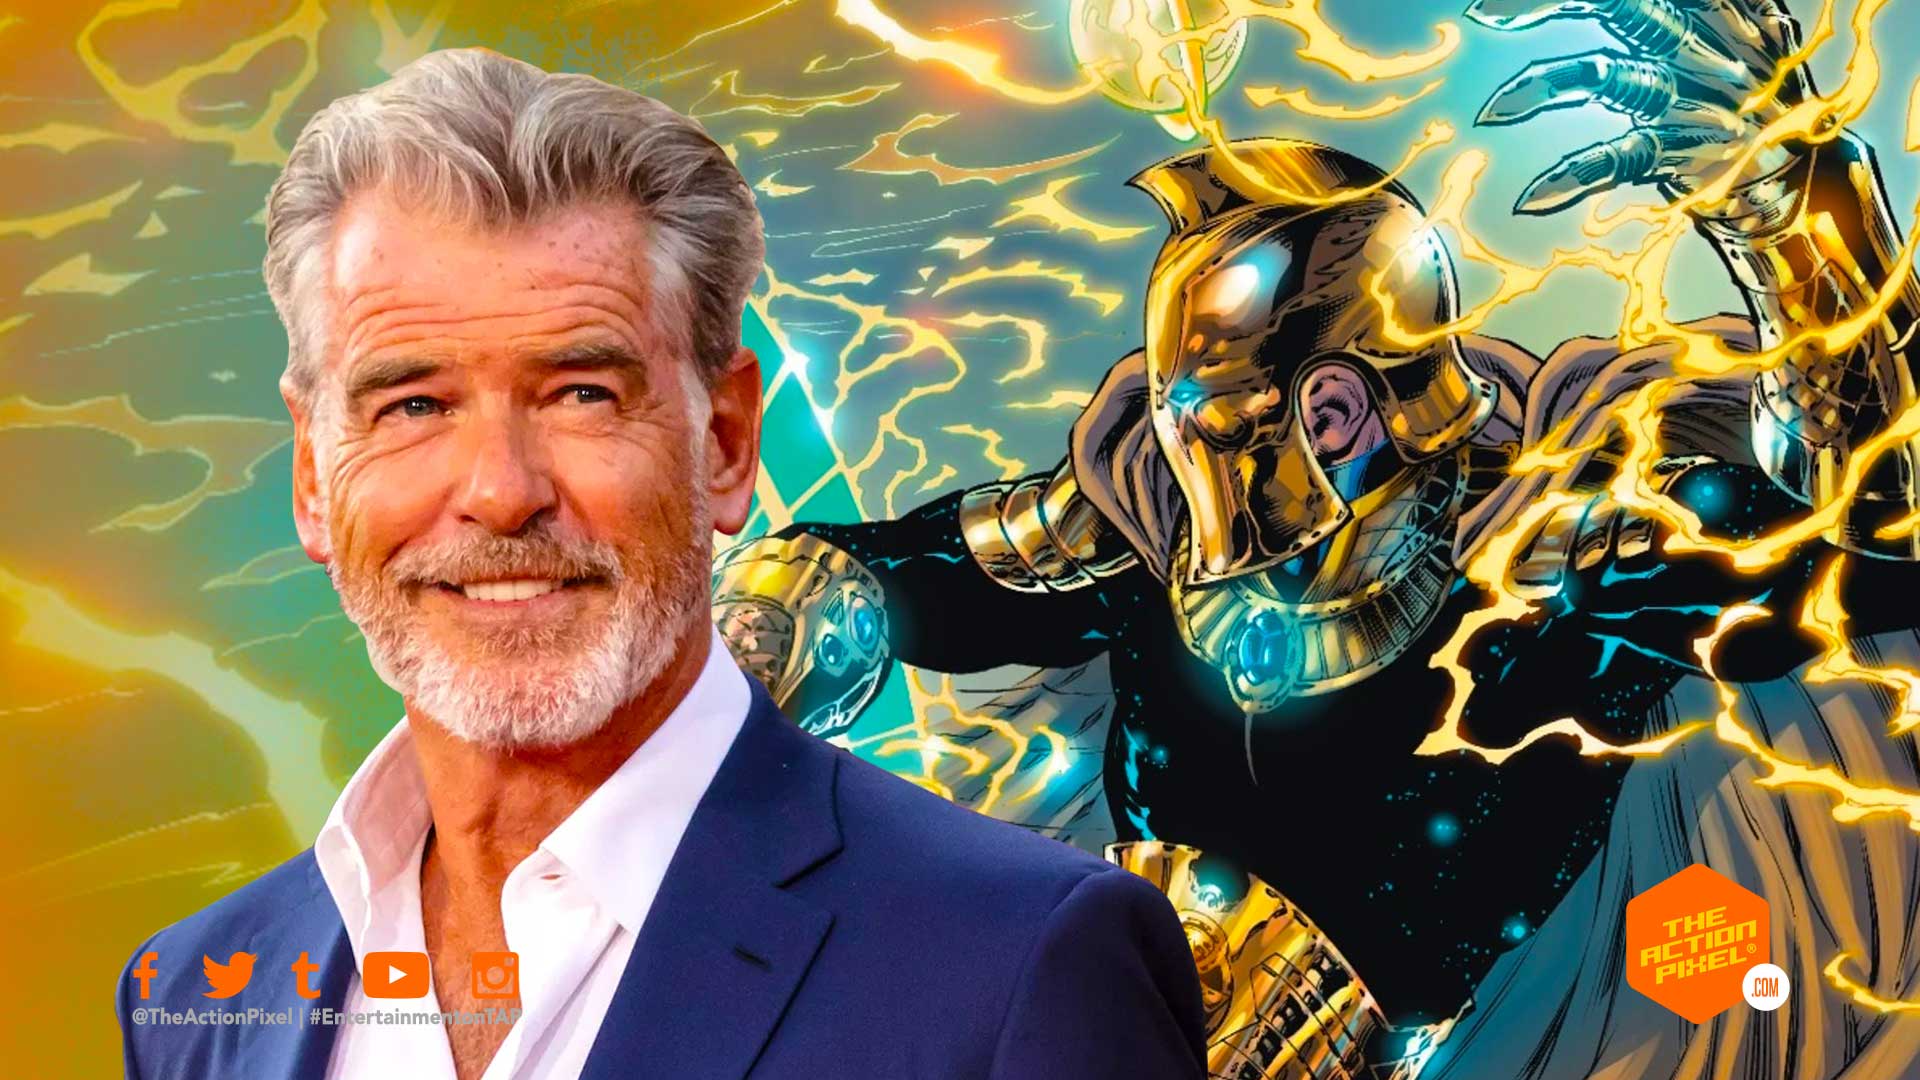 pierce brosnan, dr. fate, doctor fate, the action pixel, entertainment on tap, dwayne johnson, the rock , entertainment on tap, dc comics, dc movies, featured,